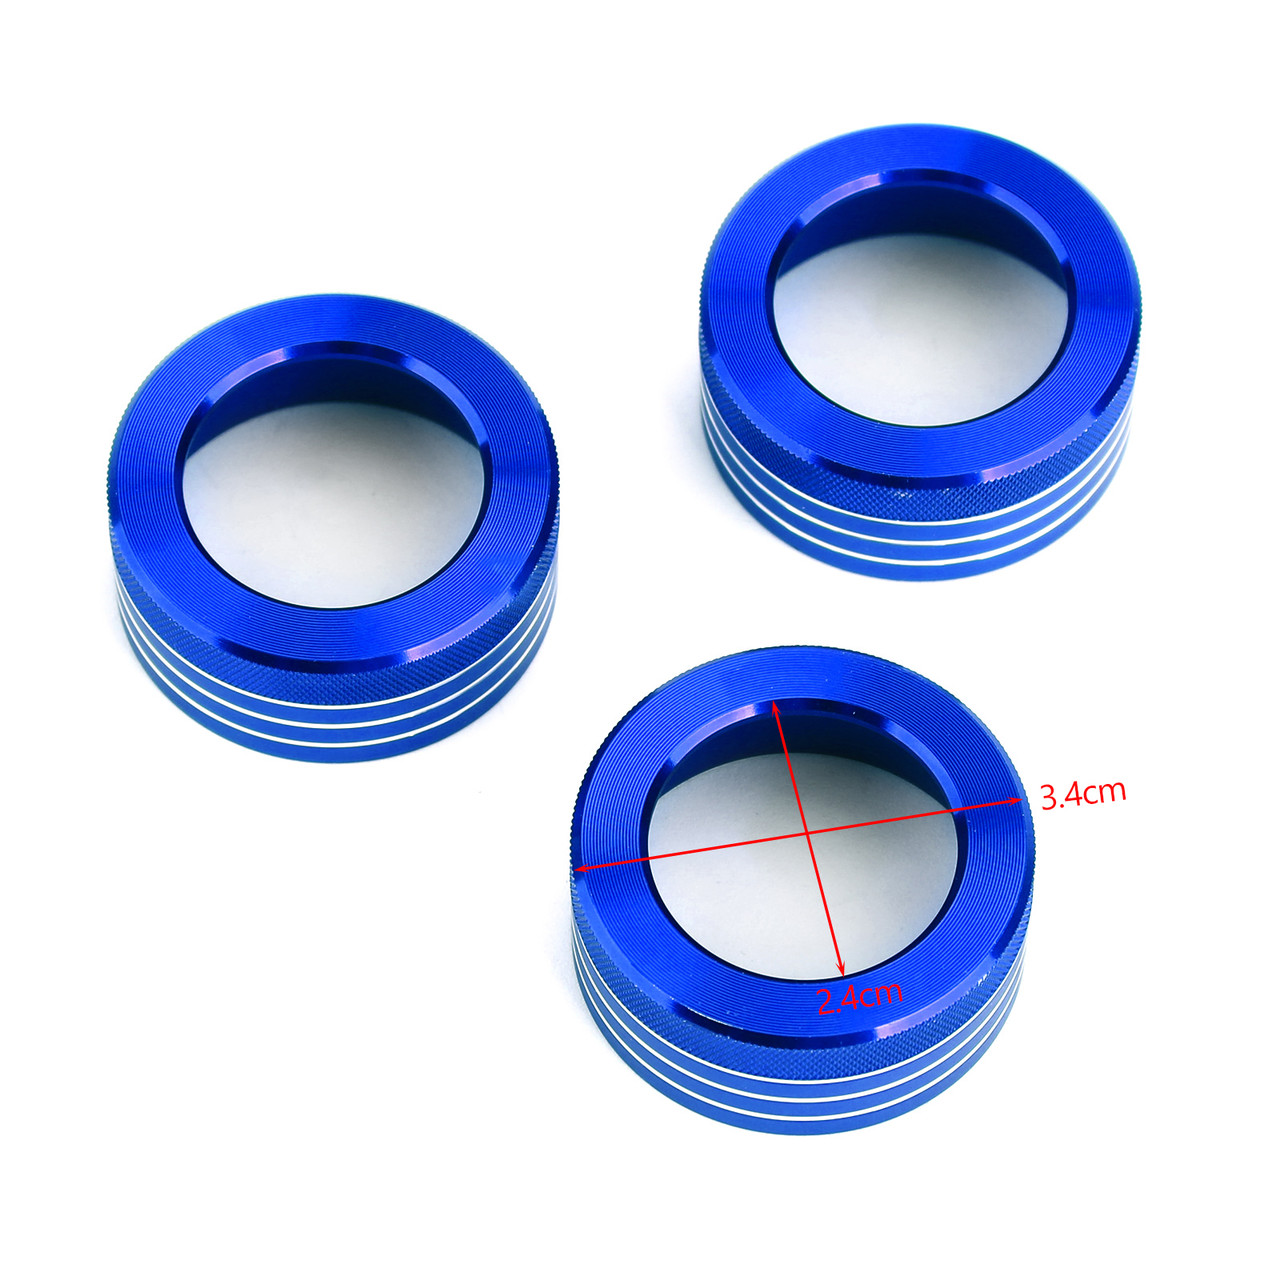 Air Conditioner Switch Knob Ring AC Knobs Cover Fit For Toyota 86 13-18 Blue